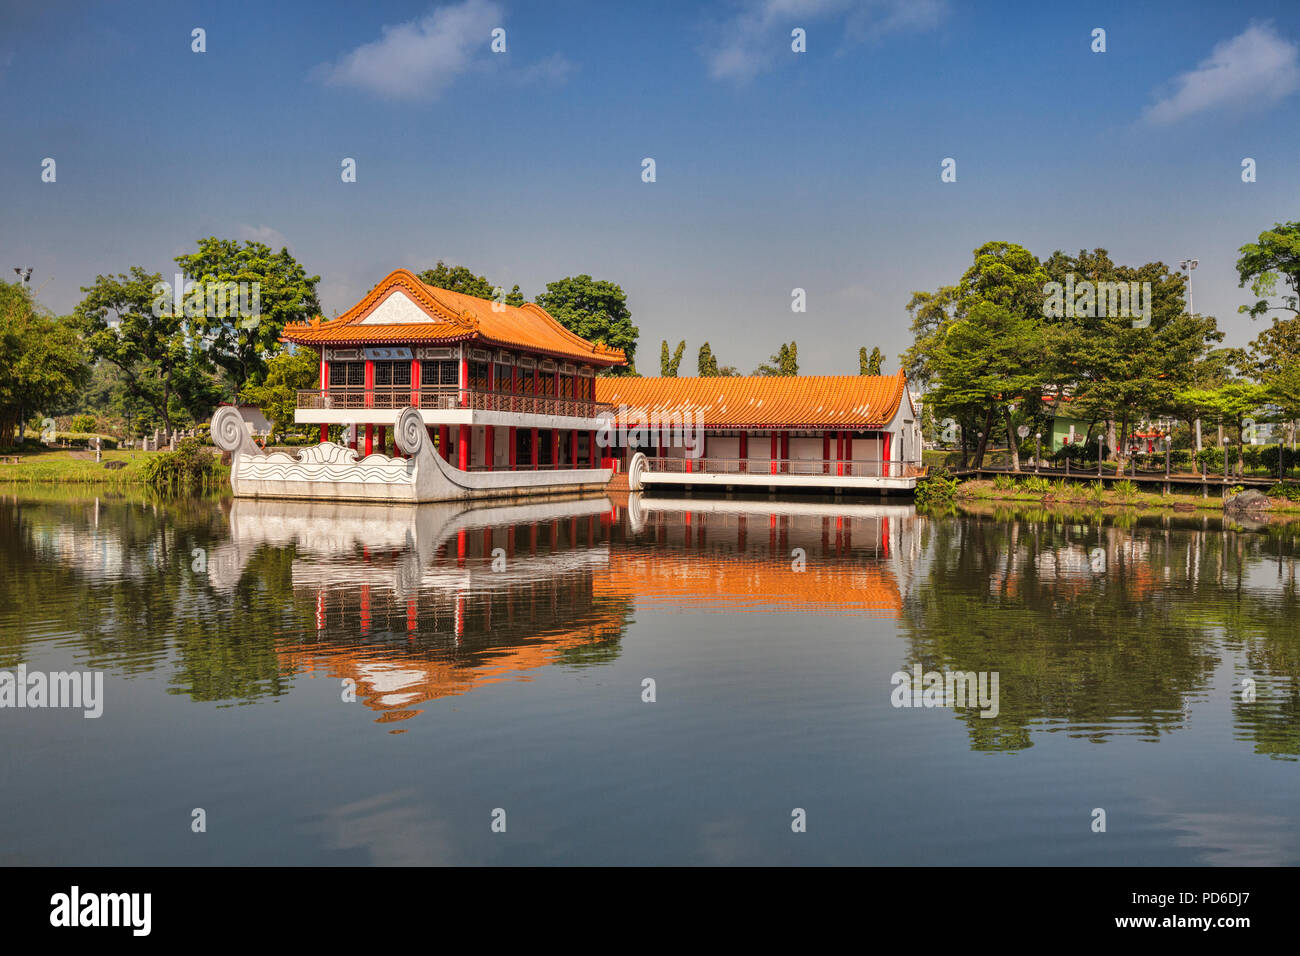 Stone boat and pavilion in the Chinese Garden, Singapore. Stock Photo